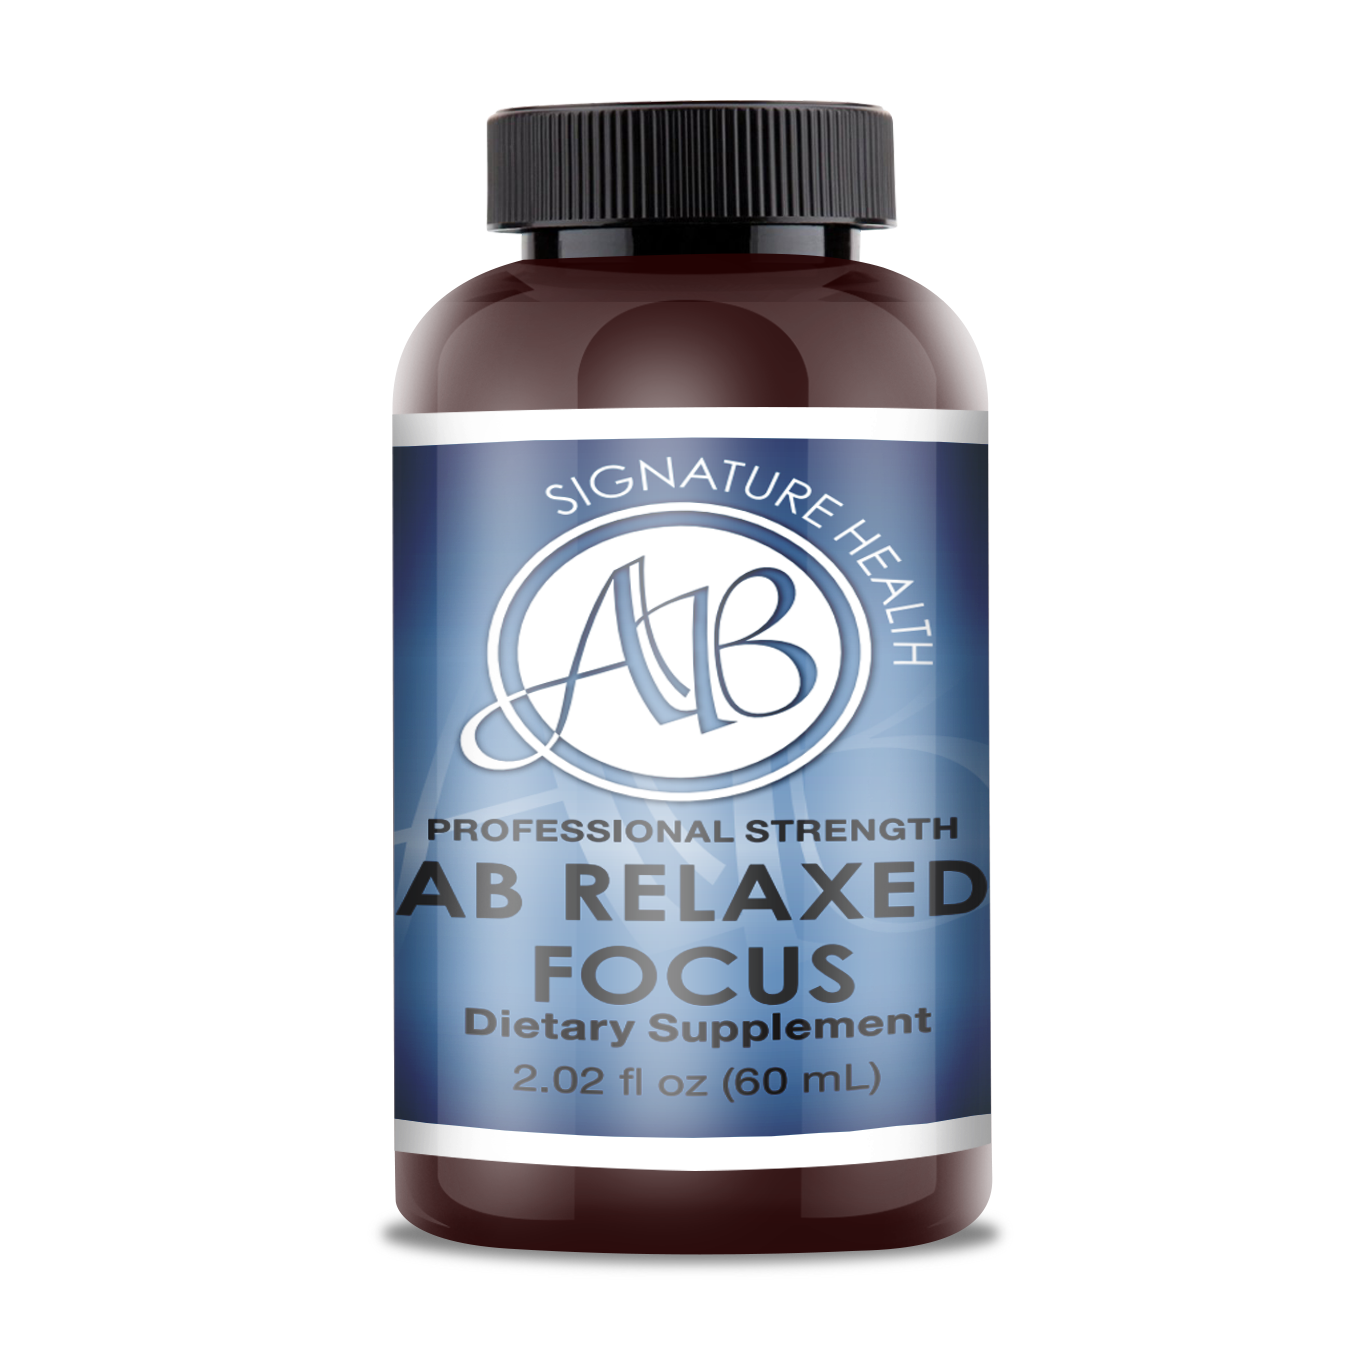 AB Relaxed Focus